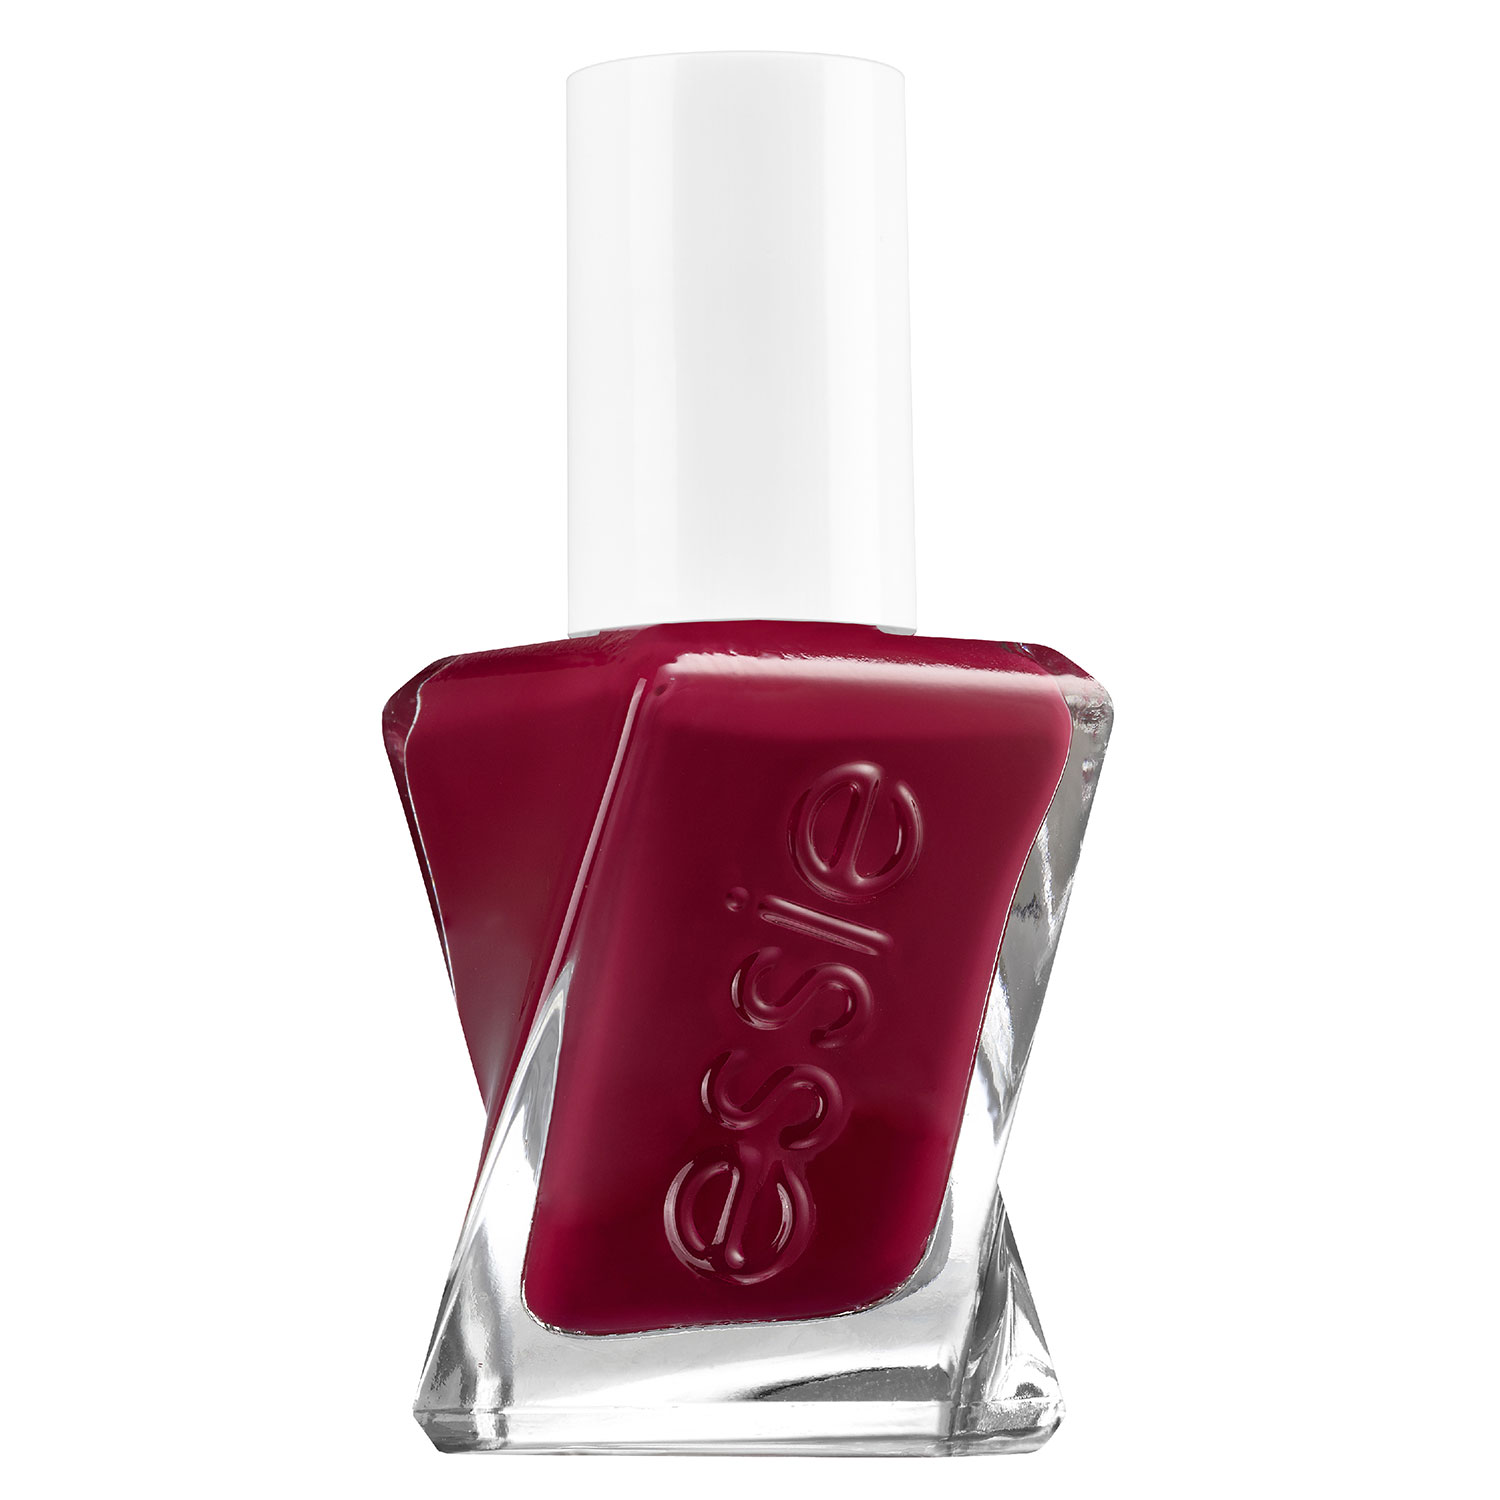 gown essie the couture - paint 509 red gel